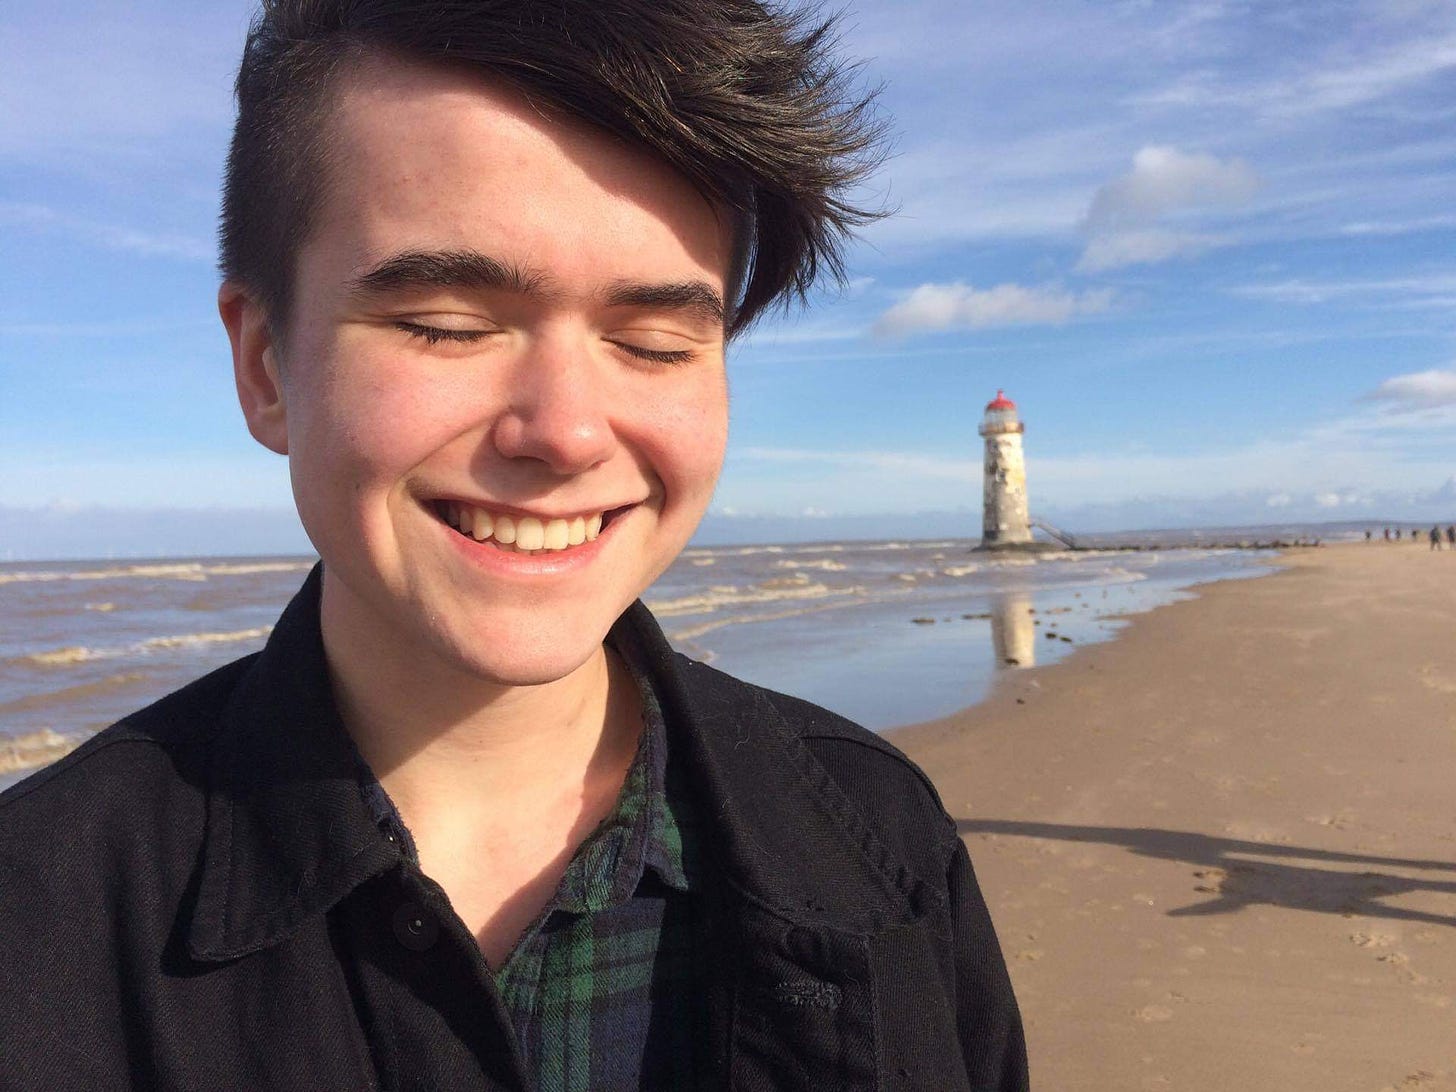 17 year old eliott on the beach, eyes closed and smiling. it is sunny and cold, and there is a battered lighthouse on the horizon